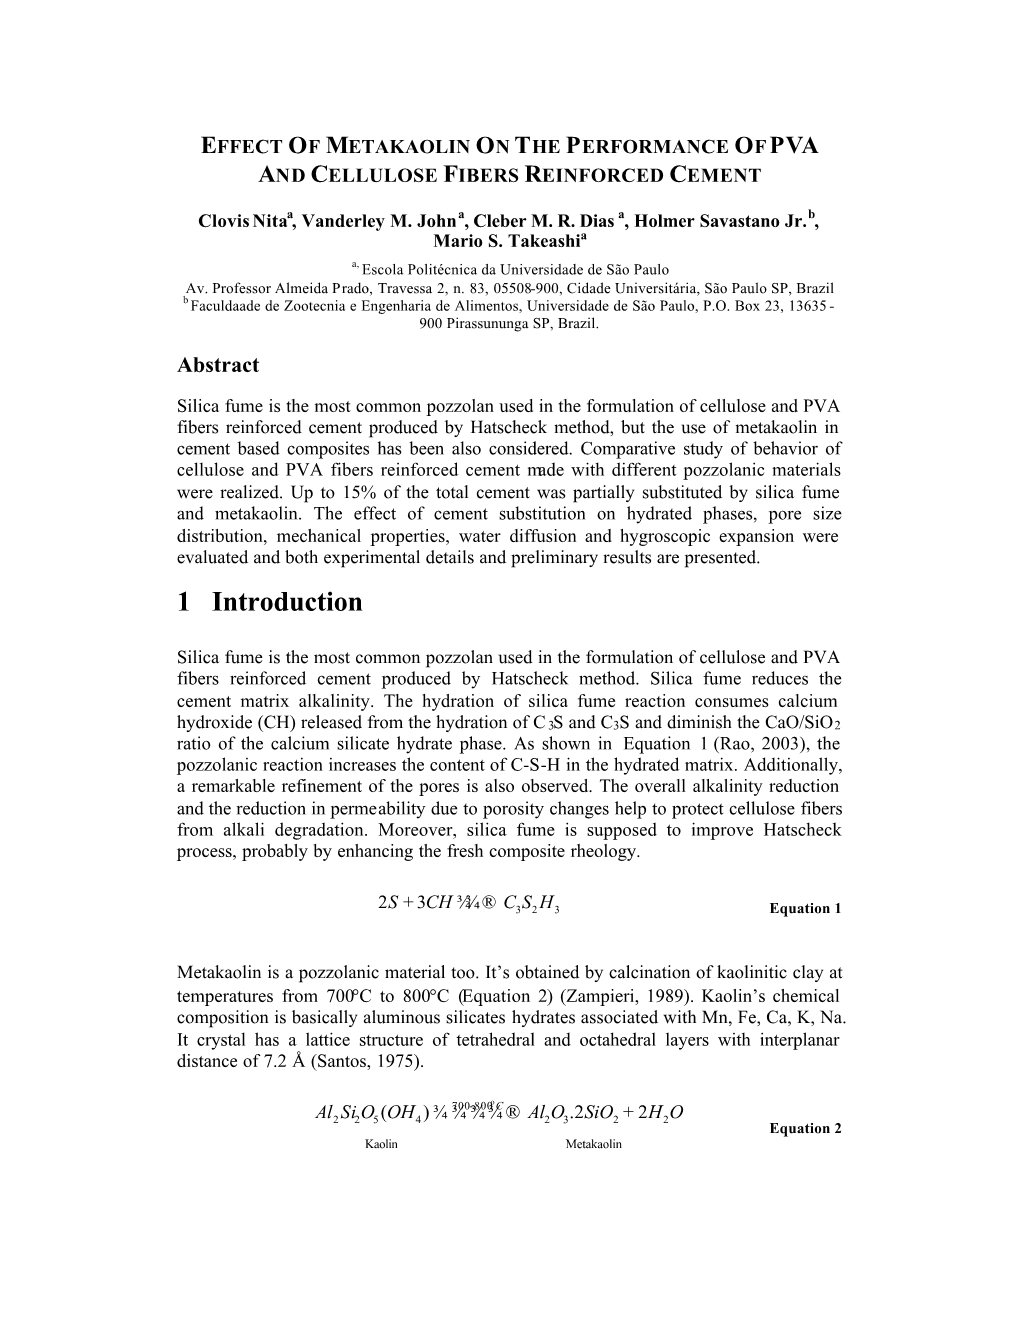 Effect of Metakaolin on the Performance of Pva and Cellulose Fibers Reinforced Cement